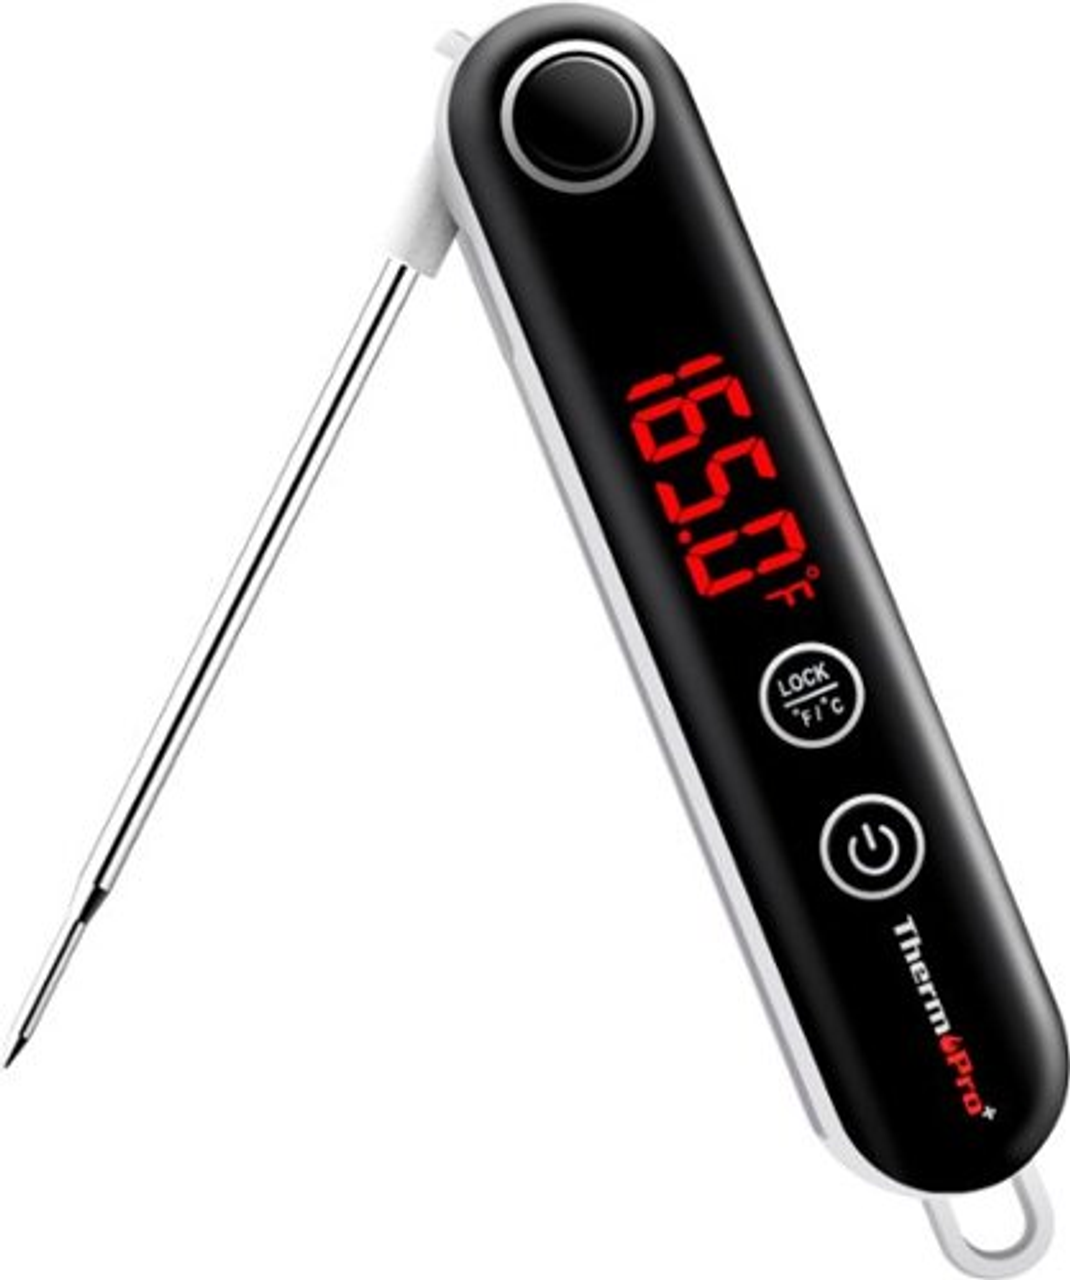 ThermoPro - Ultra Fast Digital Instant Read Meat Thermometer - Red